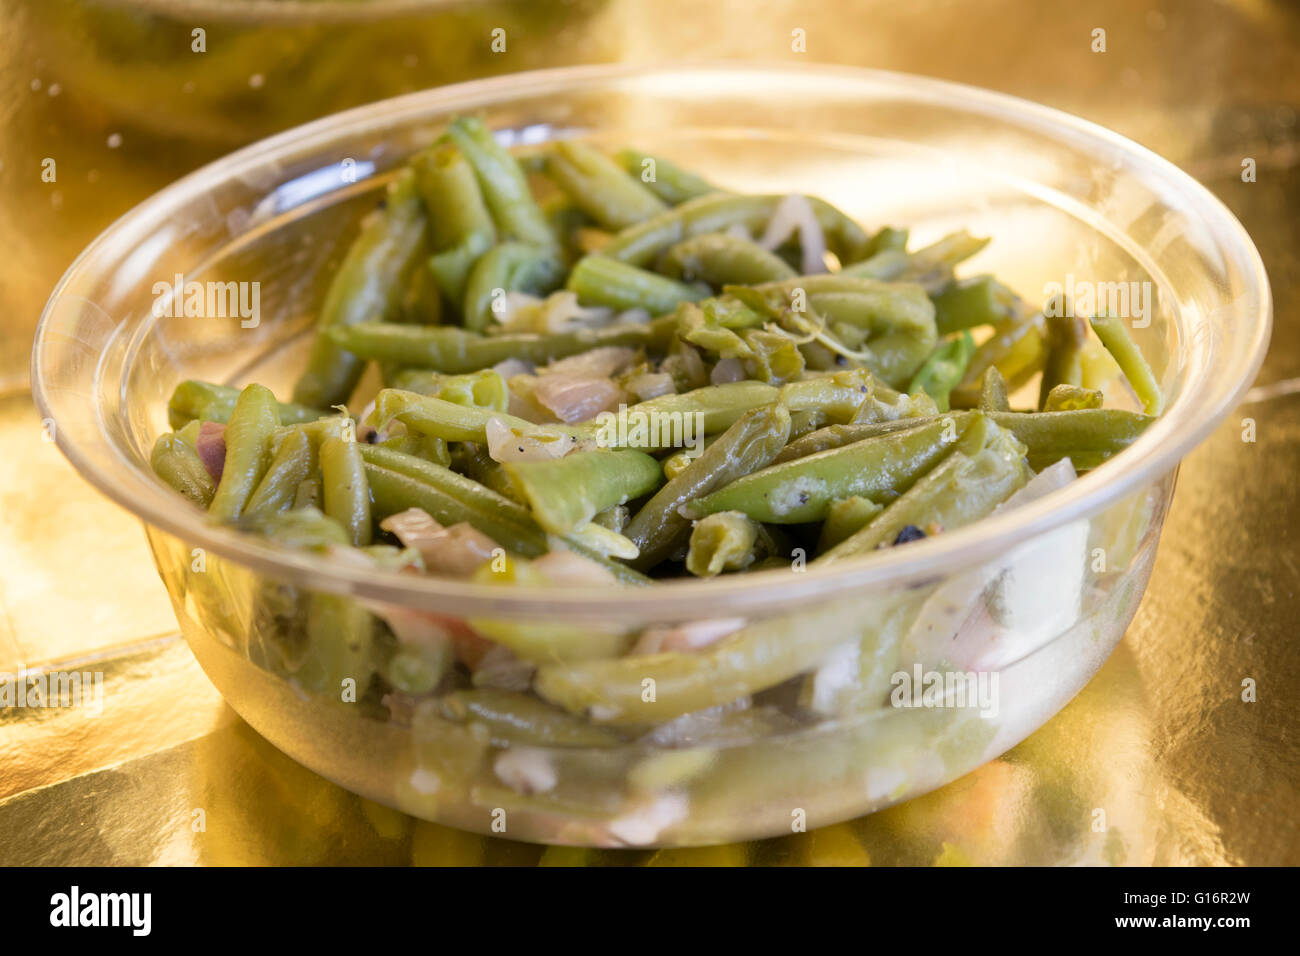 french beans stir-fried with bacon and served on a glass bowl Stock Photo